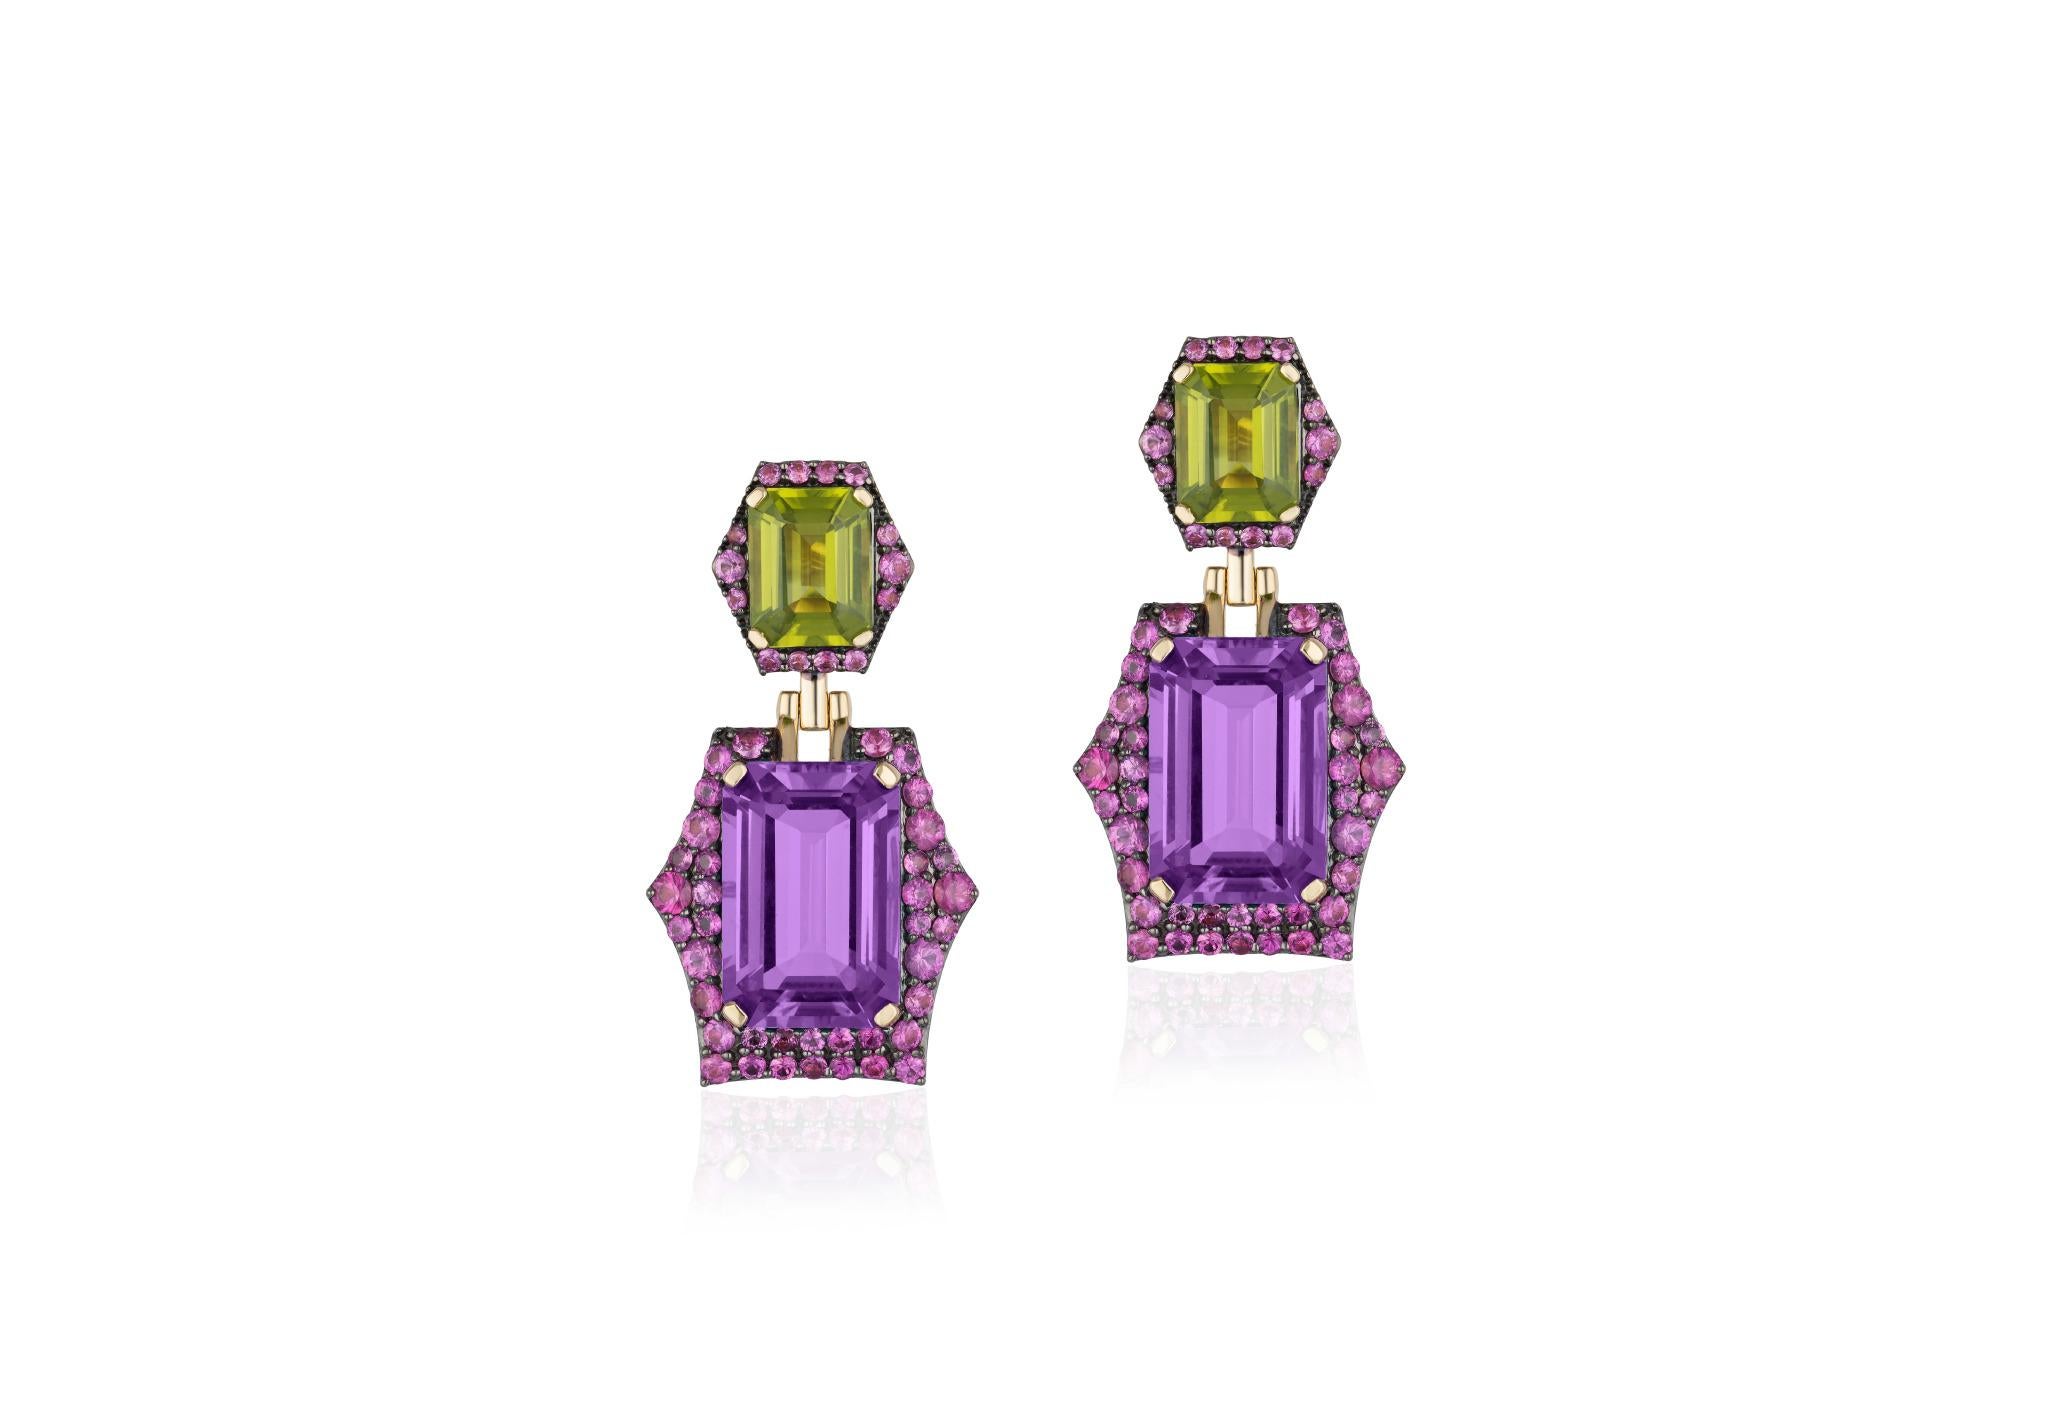 Amethyst, Peridot and Pink Sapphire Earrings in 18K Yellow Gold and Light Black Rhodium, from 'Rain-Forest' Collection
*Gemstone Size: 15 x 10mm, 9 x 7mm
*Gemstone Approx. Weight: Amethyst: 13.24 Carats 
                                             